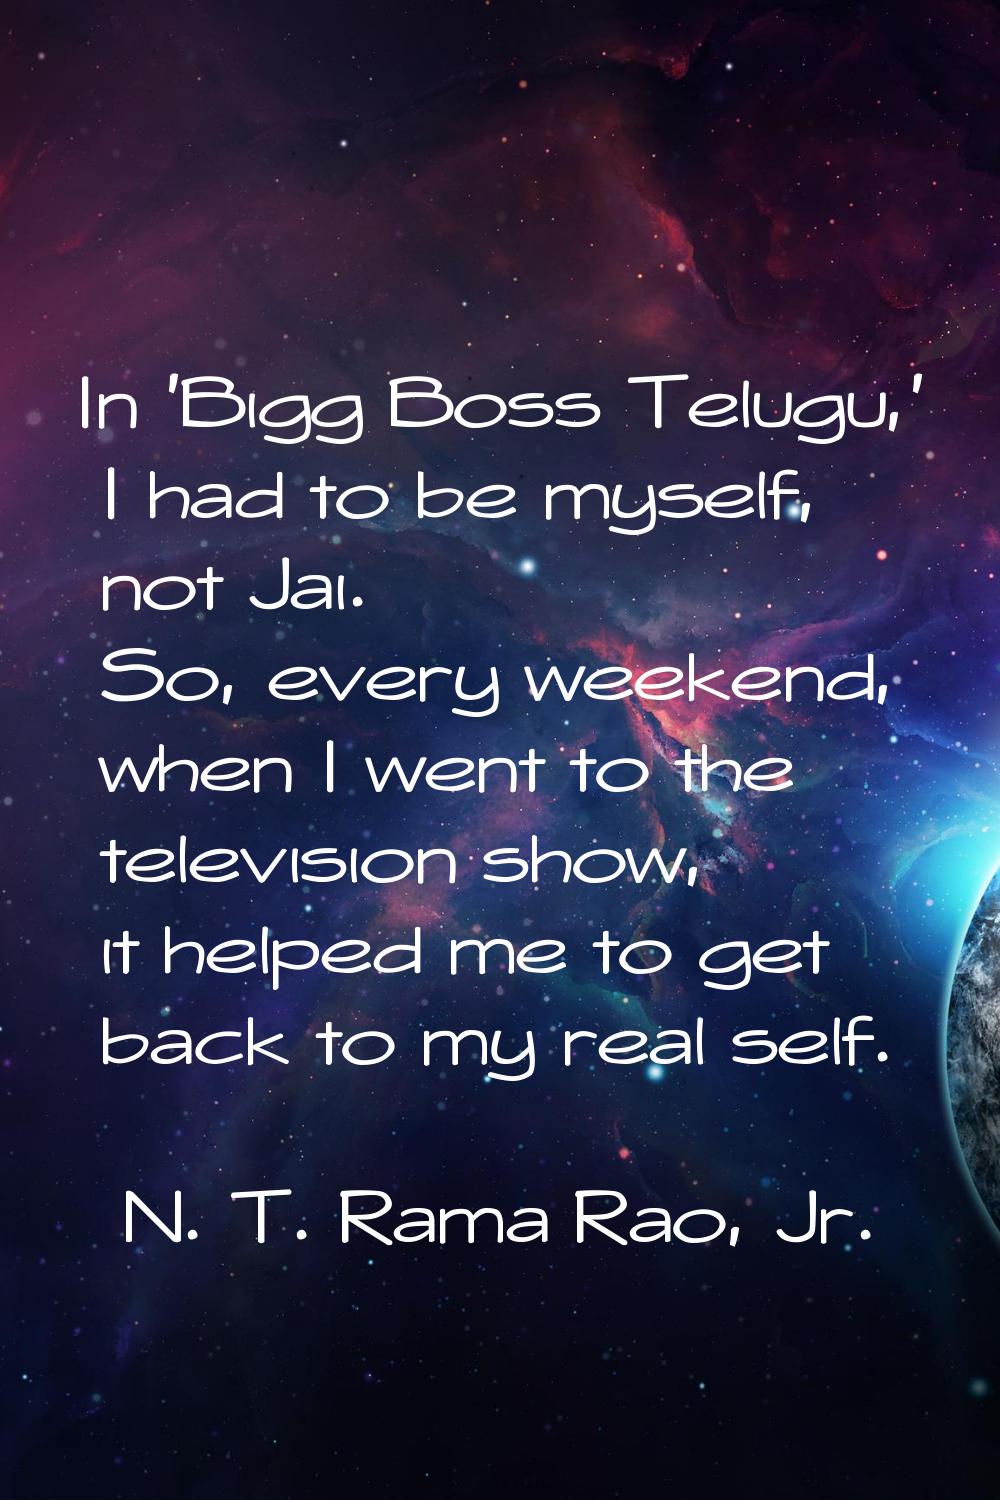 In 'Bigg Boss Telugu,' I had to be myself, not Jai. So, every weekend, when I went to the televisio